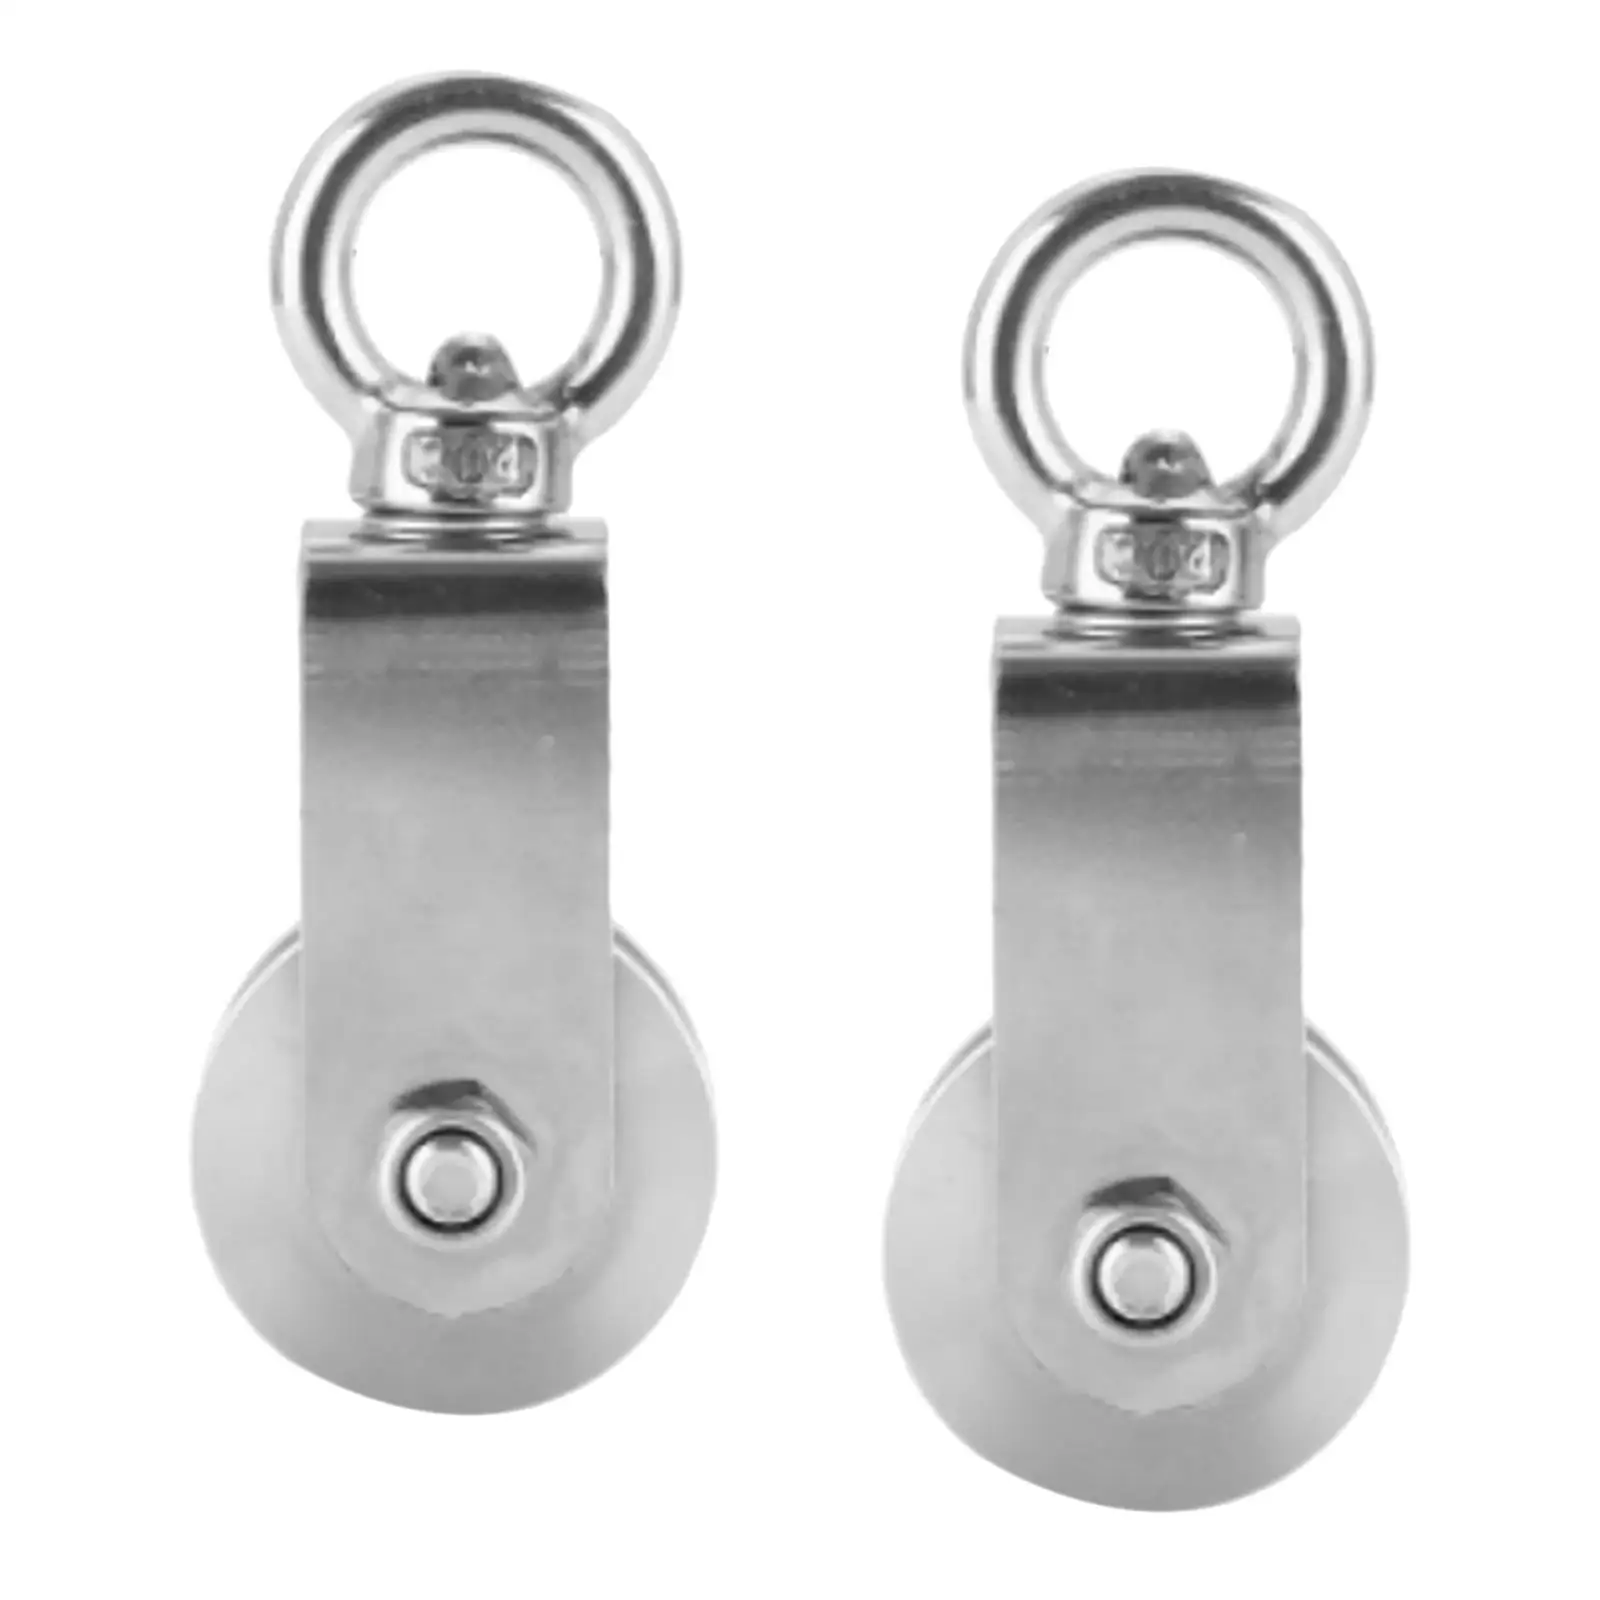 2x Stainless Steel Pulley Block Smooth Gym Equipment Lifting Wheel for DIY Attachment DIY Home Projects Gym Wire Maintenance